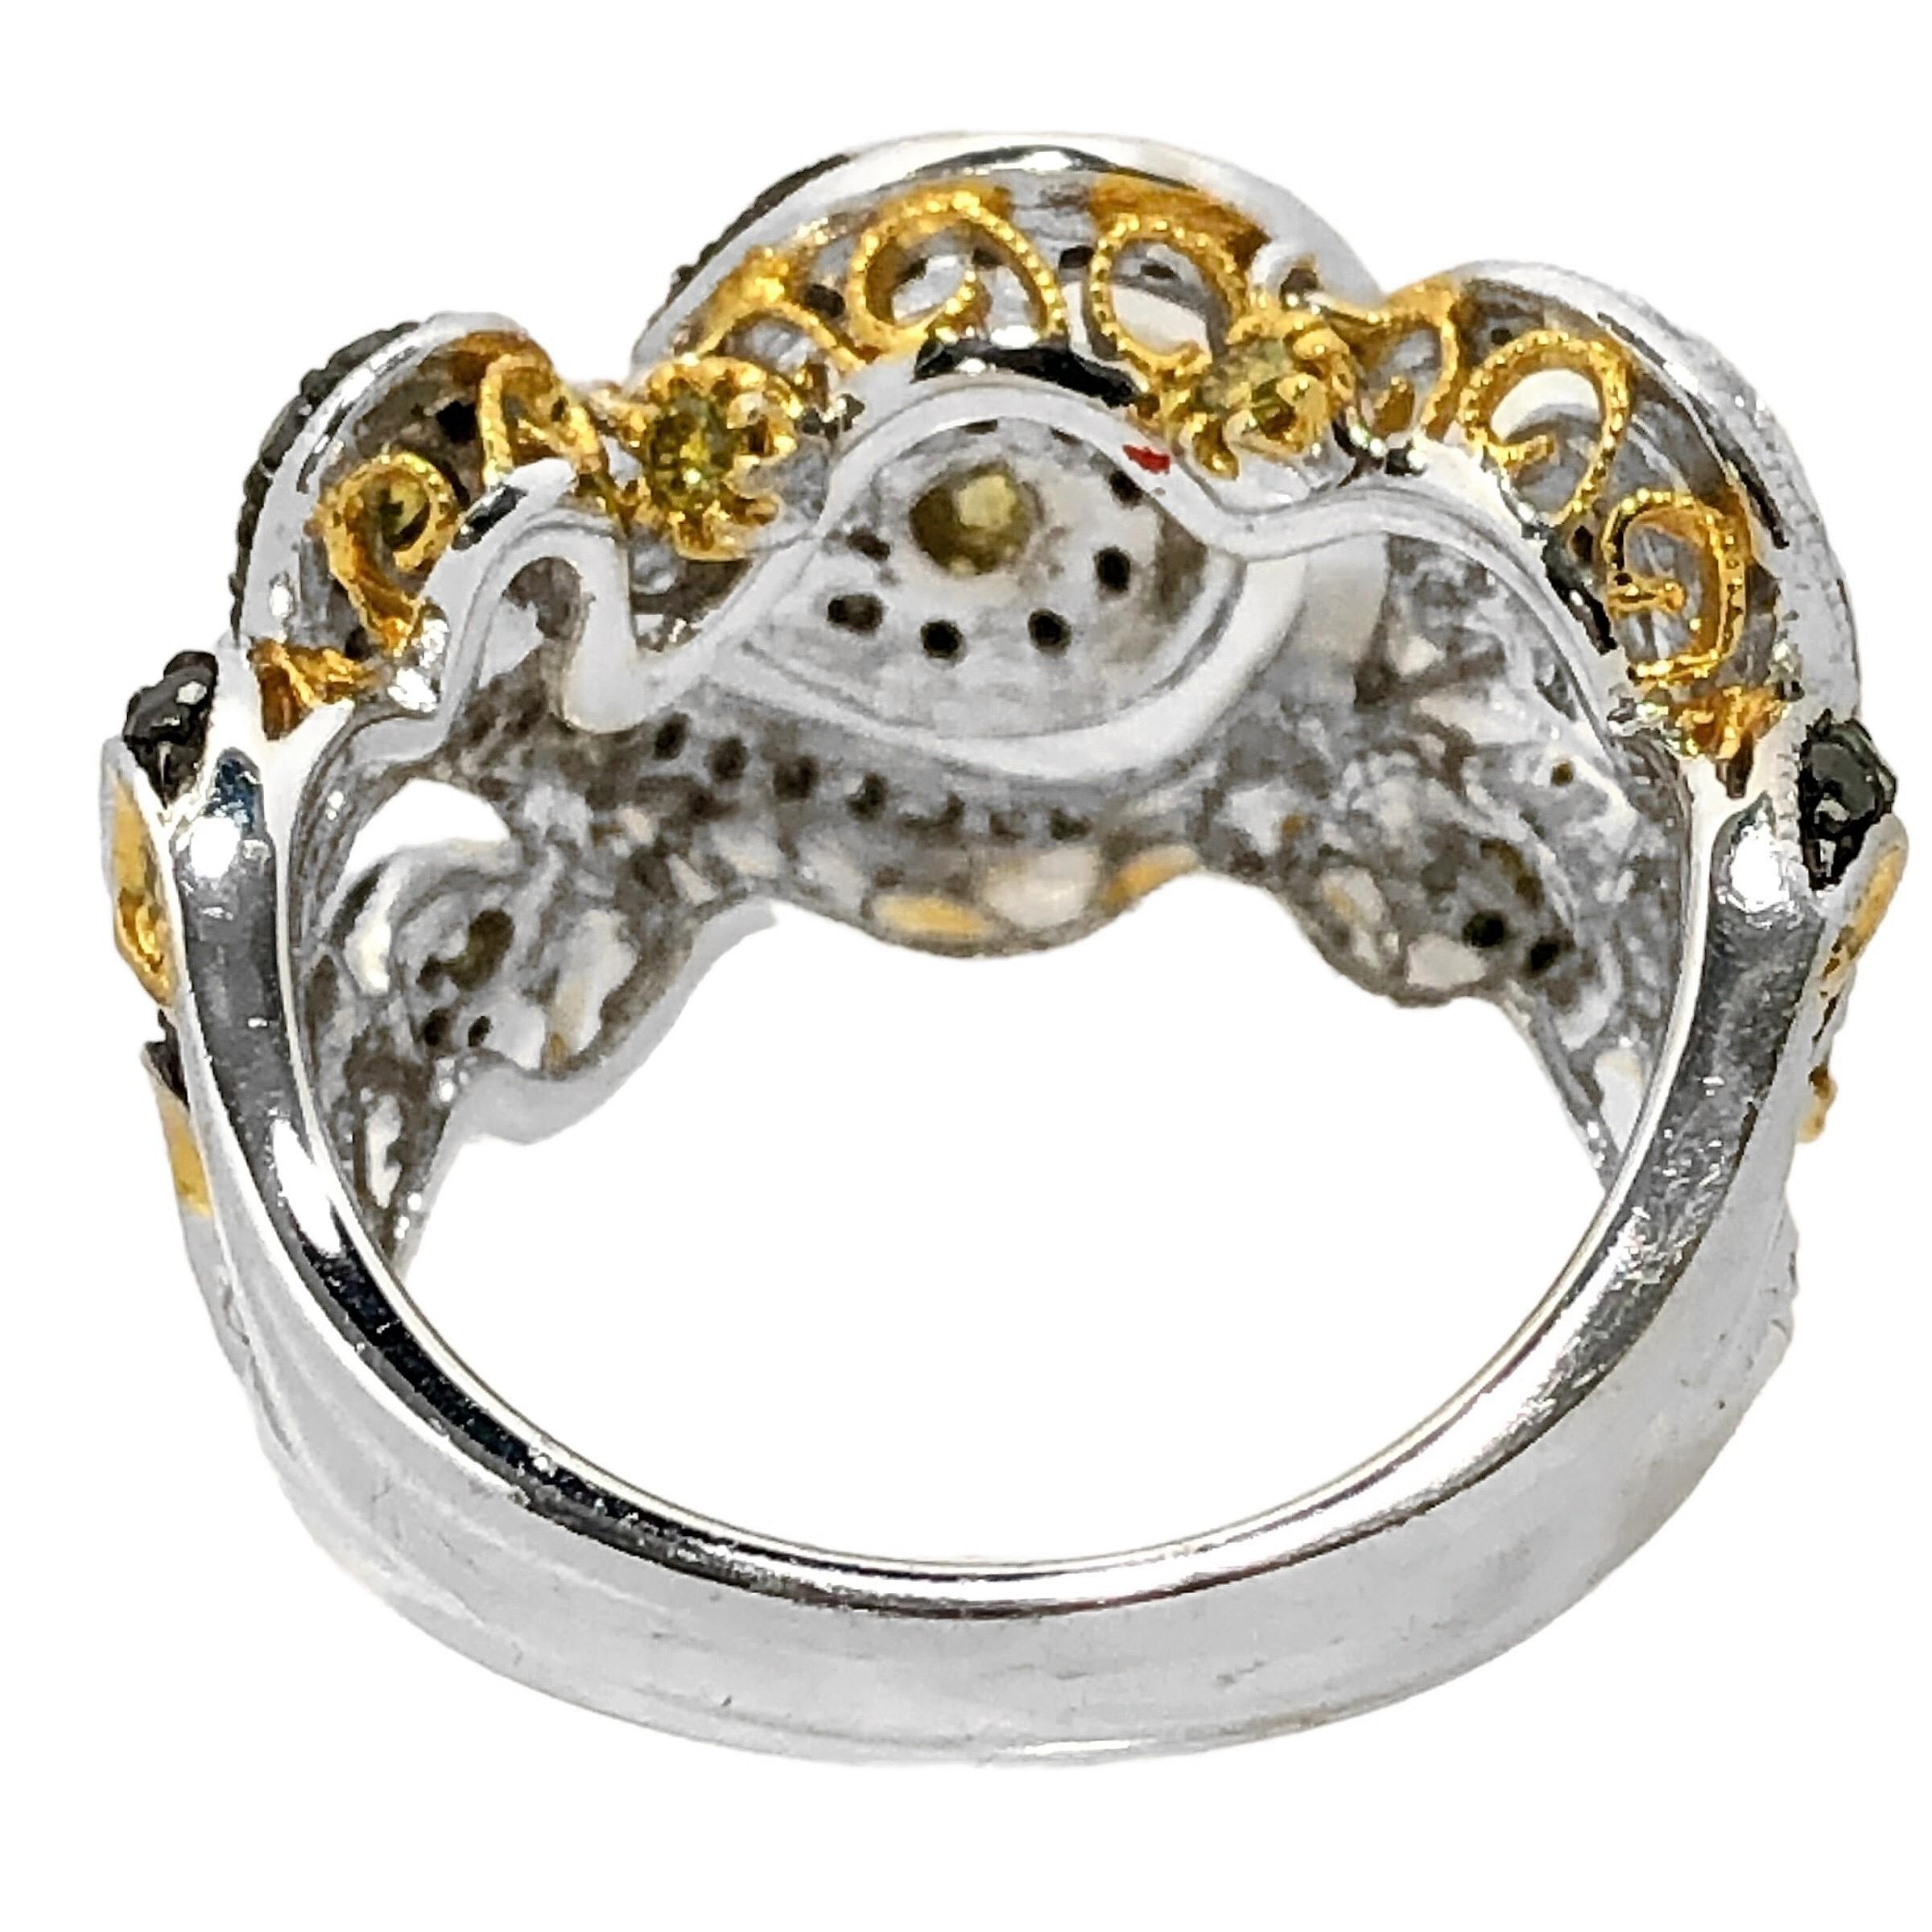 Modern 14K White Gold Ring with Fancy Yellow and Black Diamonds in Swirl Motif 1